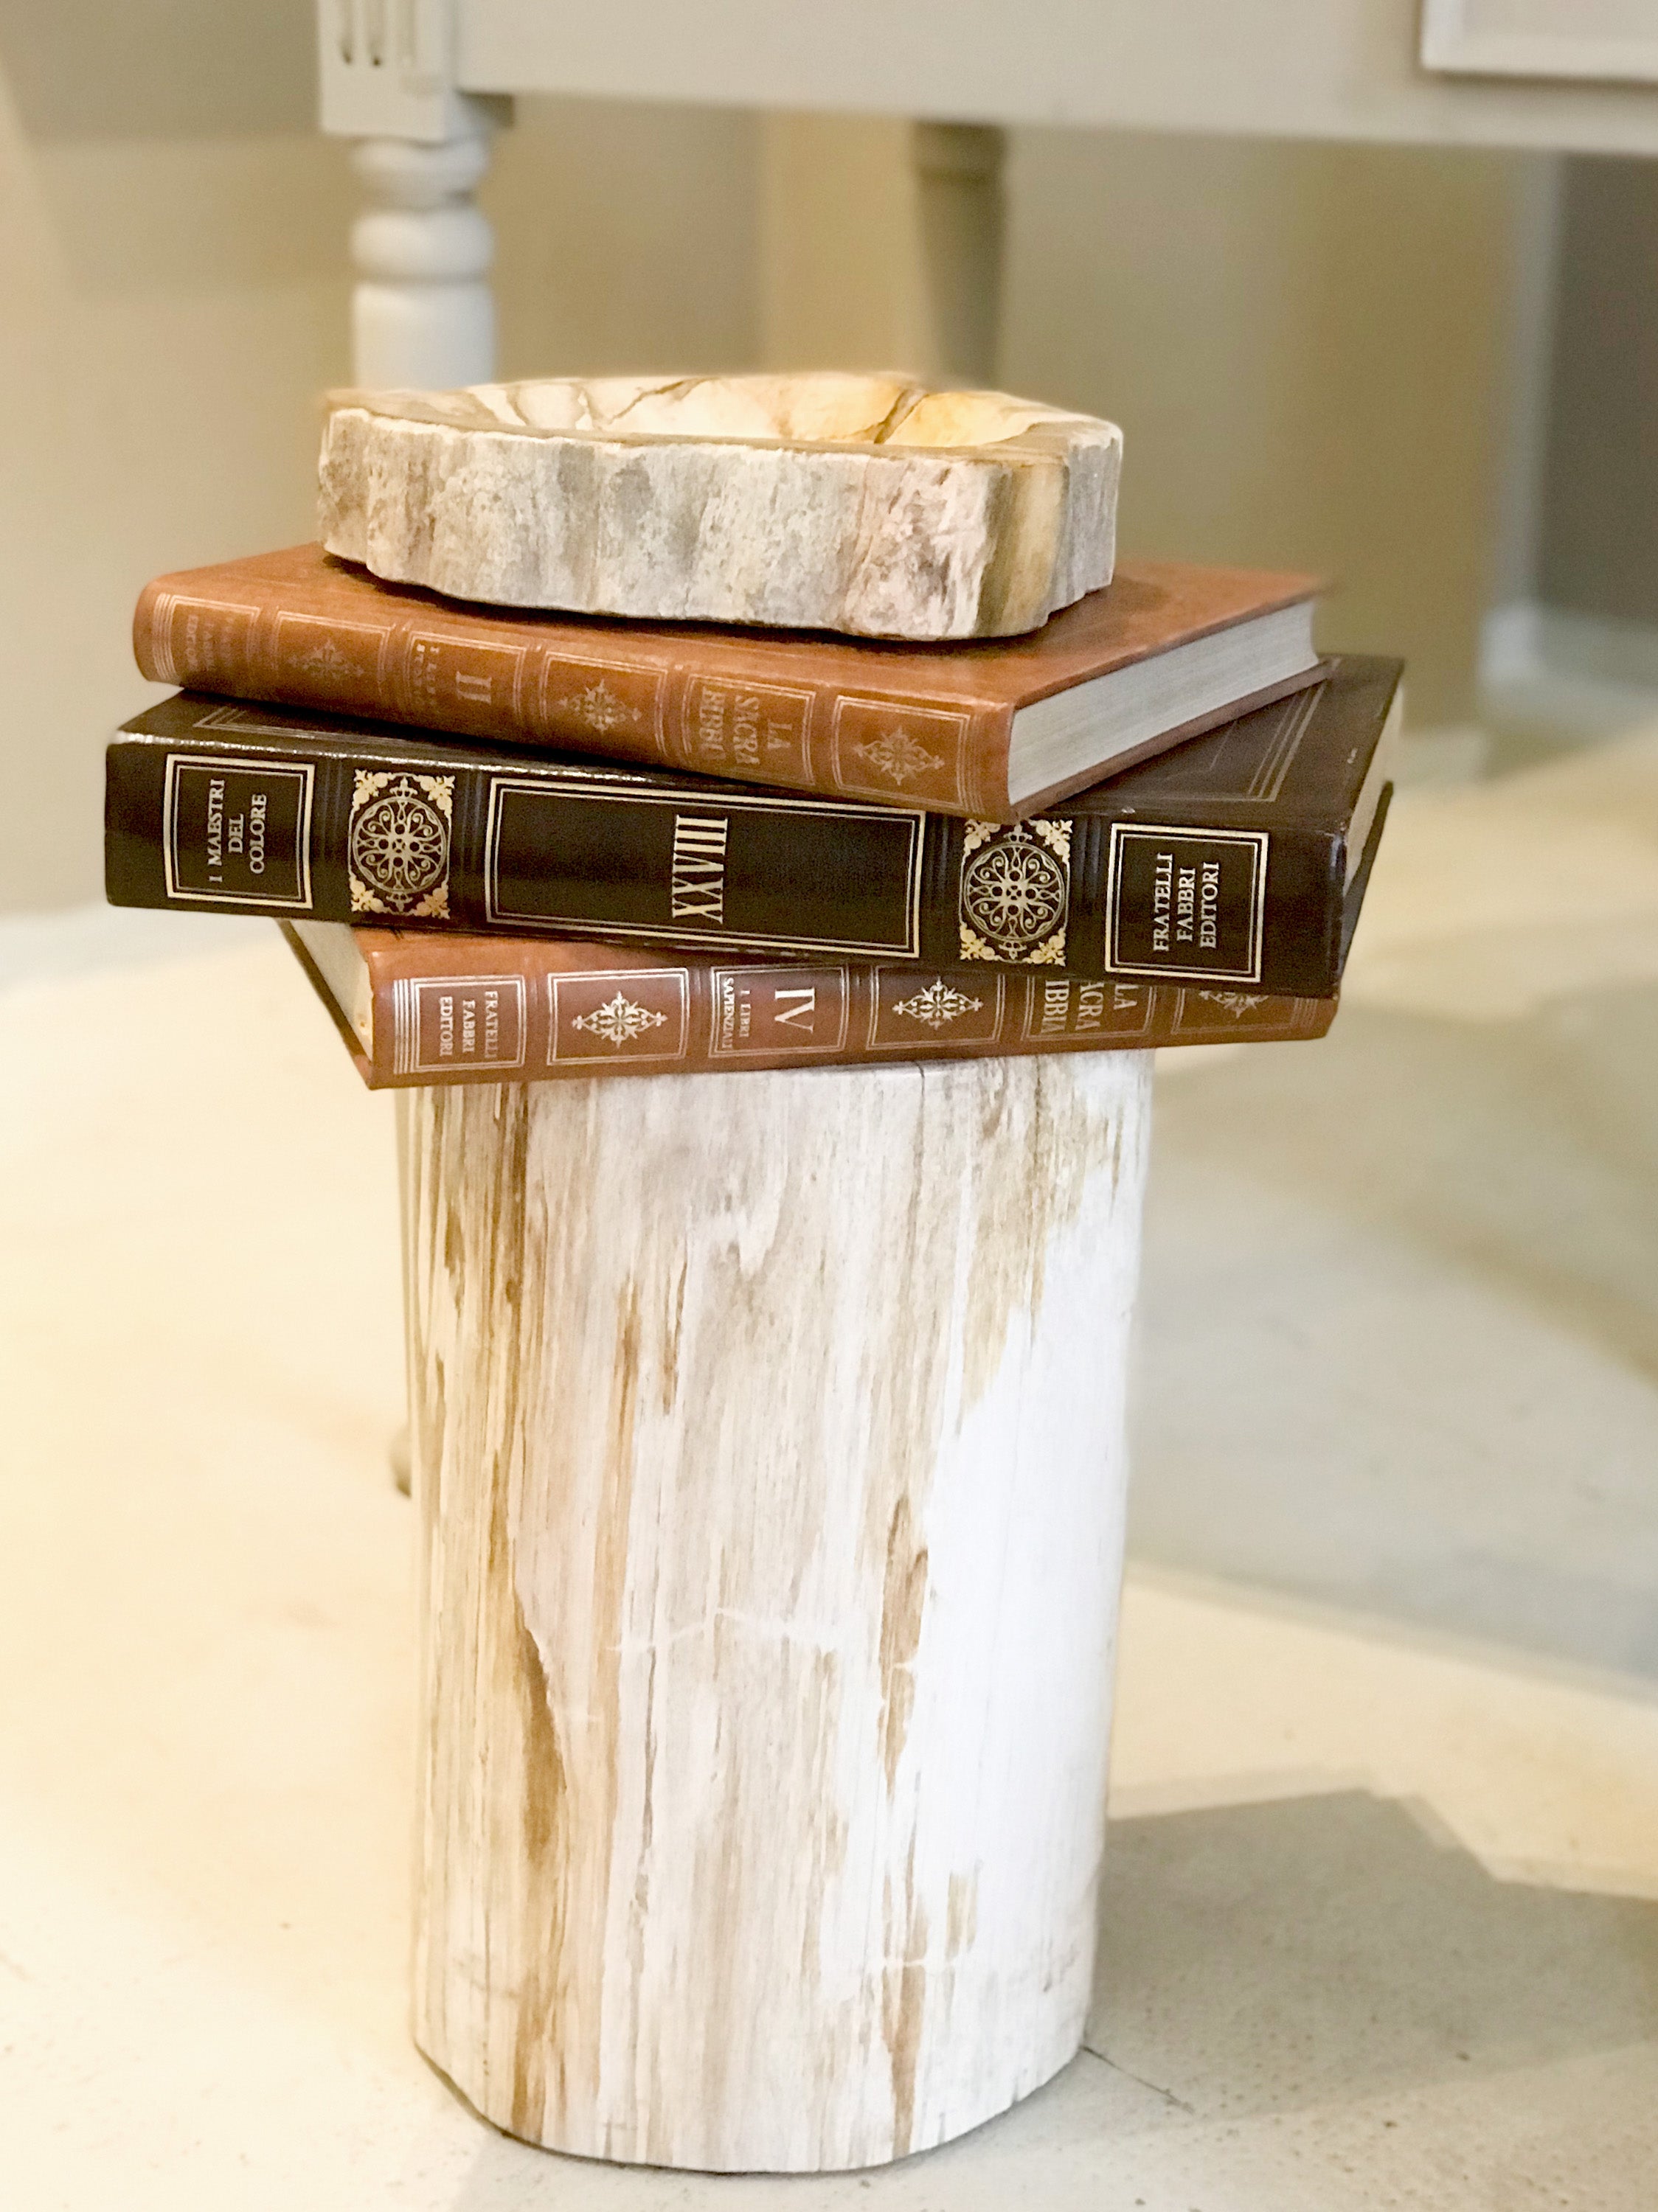 Petrified Wood Bowl - Enjoy Italy's largest collection of Petrified wood accessories!